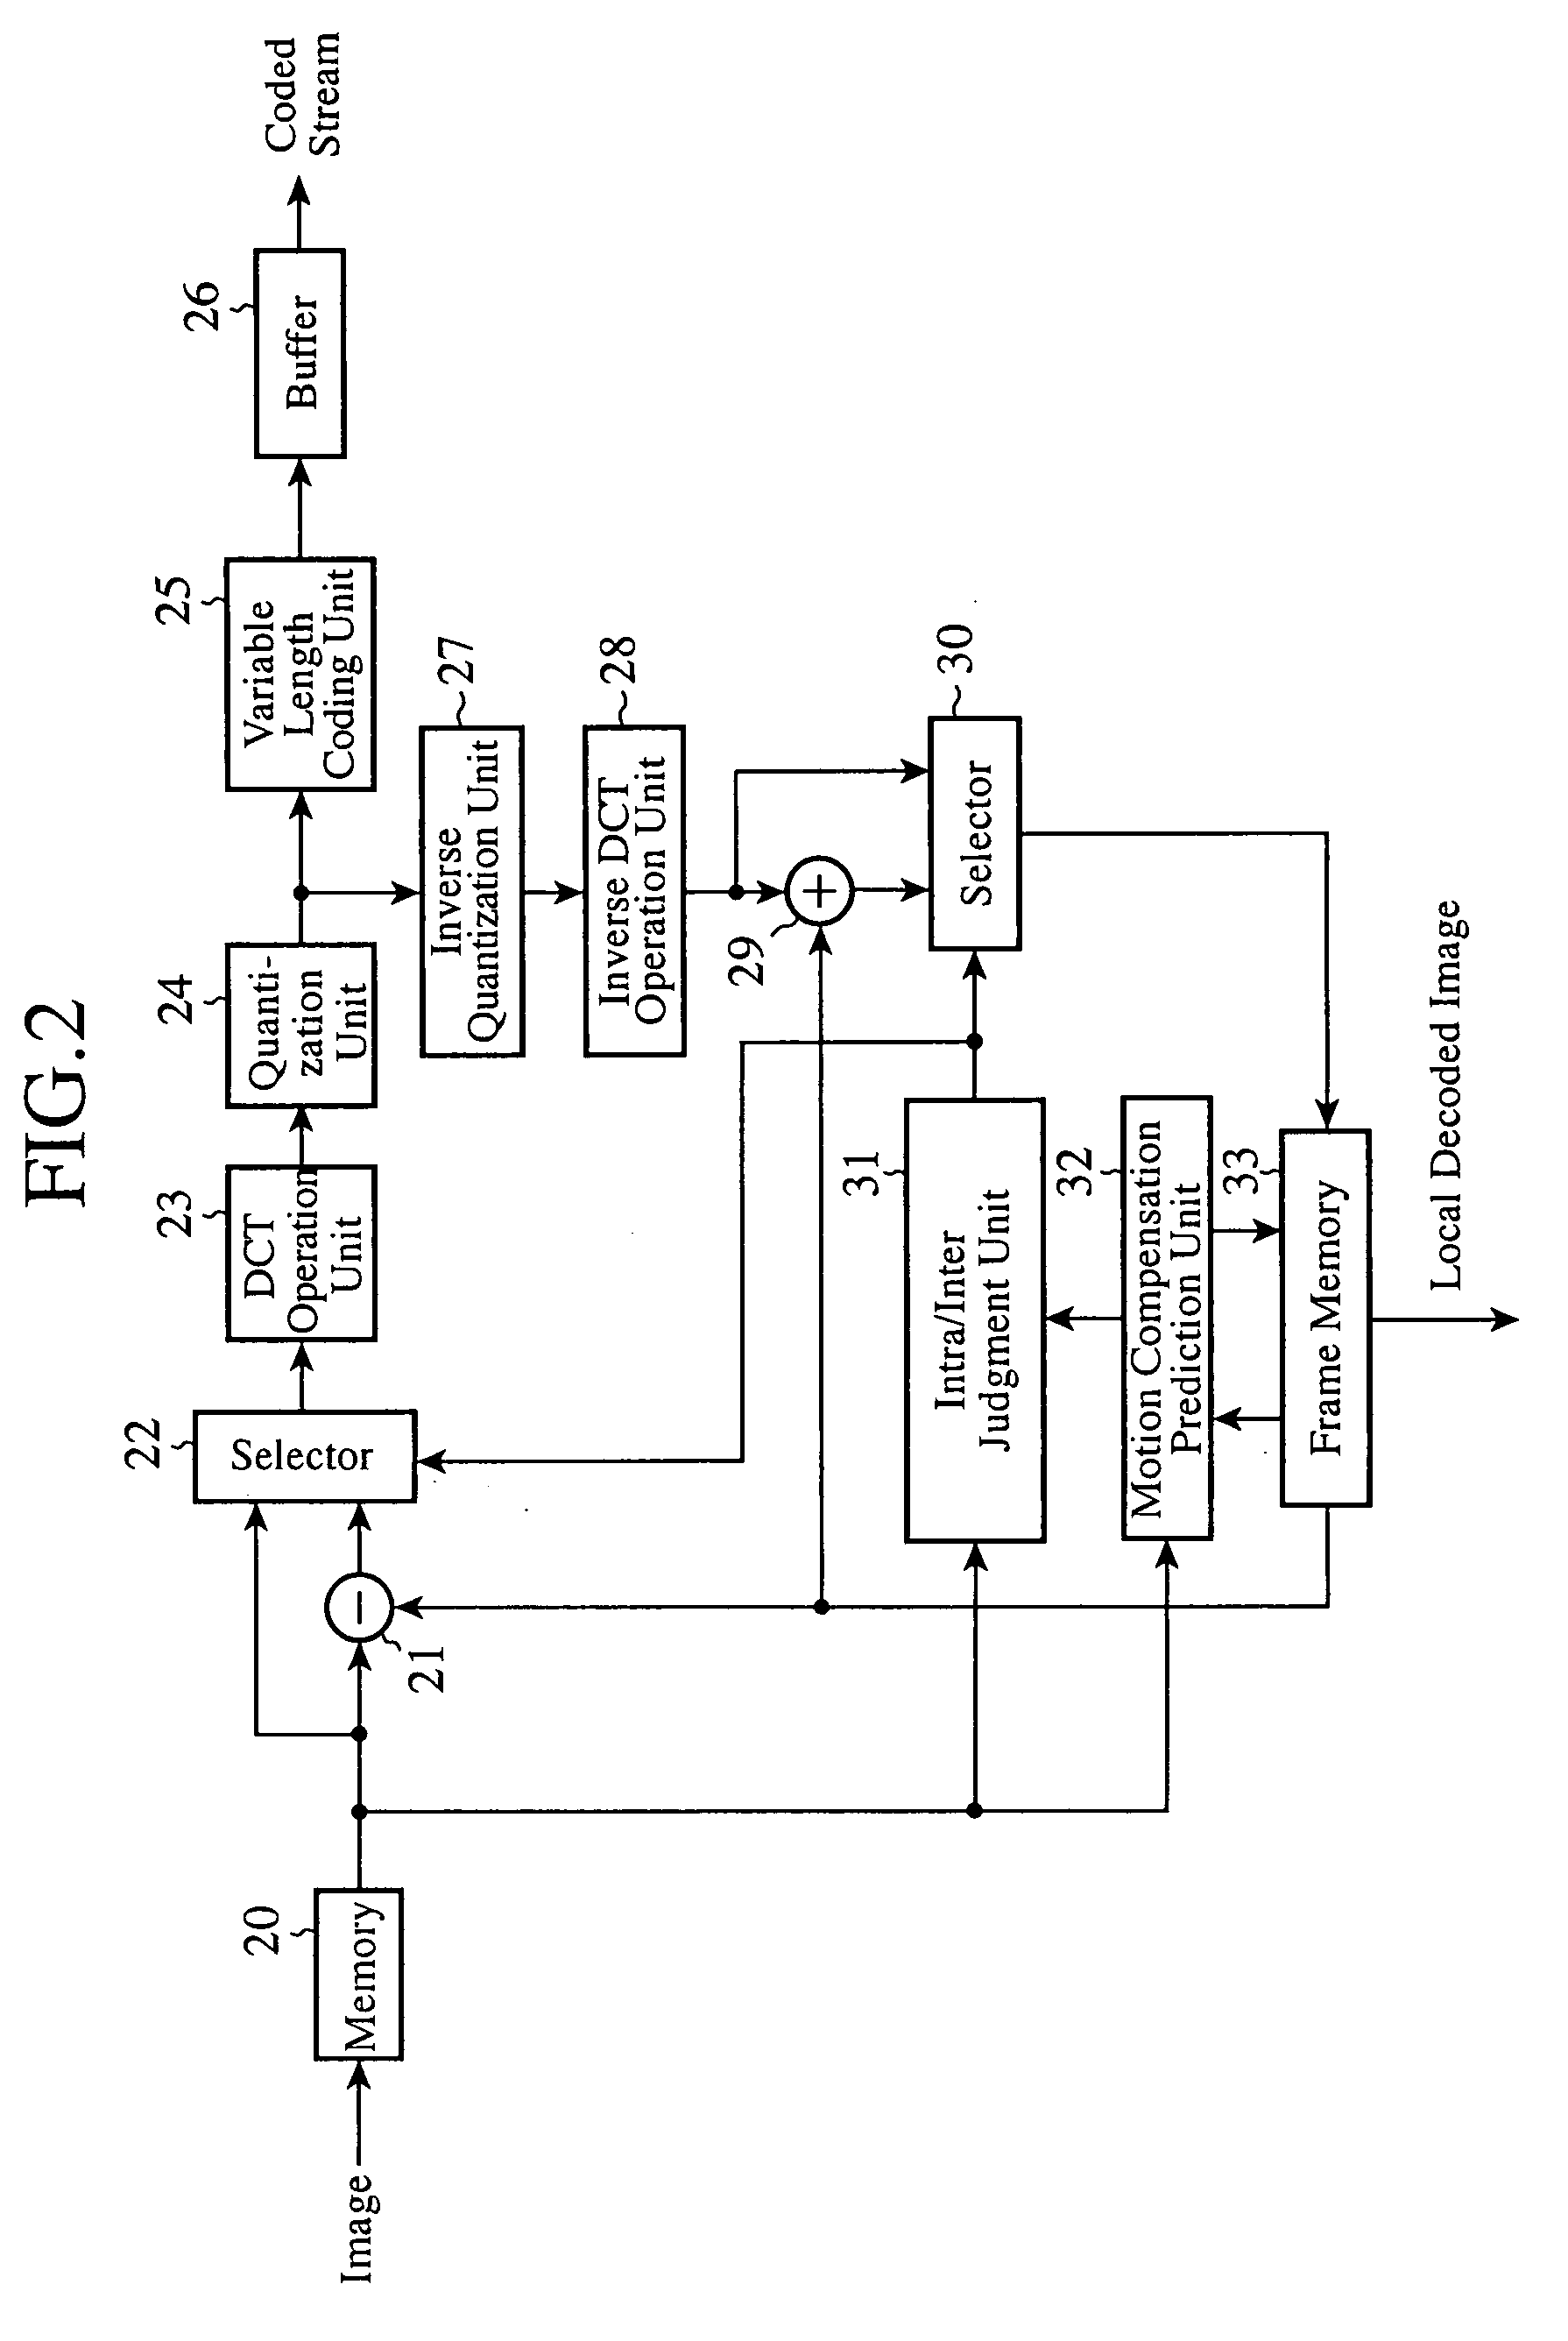 Image Coding, Recording and Reading Apparatus